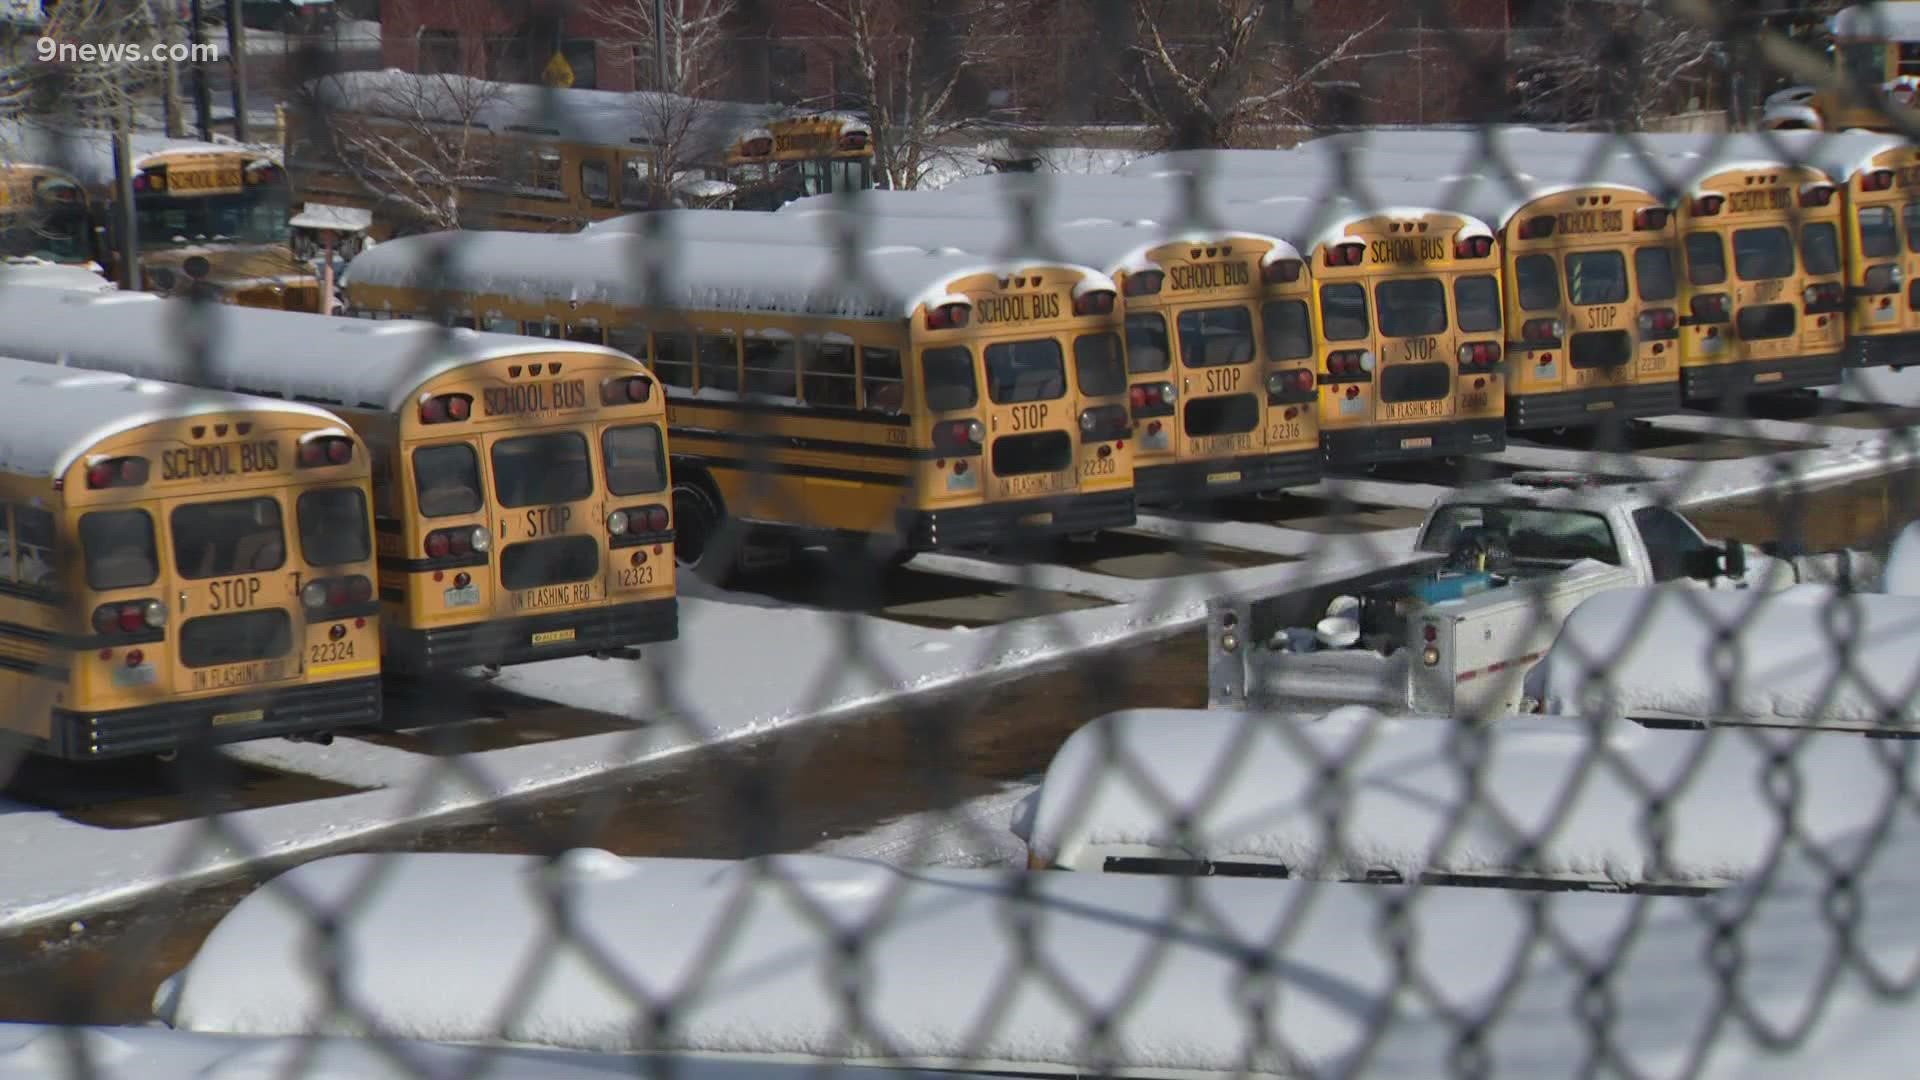 Denver Public Schools, APS closed due to snow and staffing issues